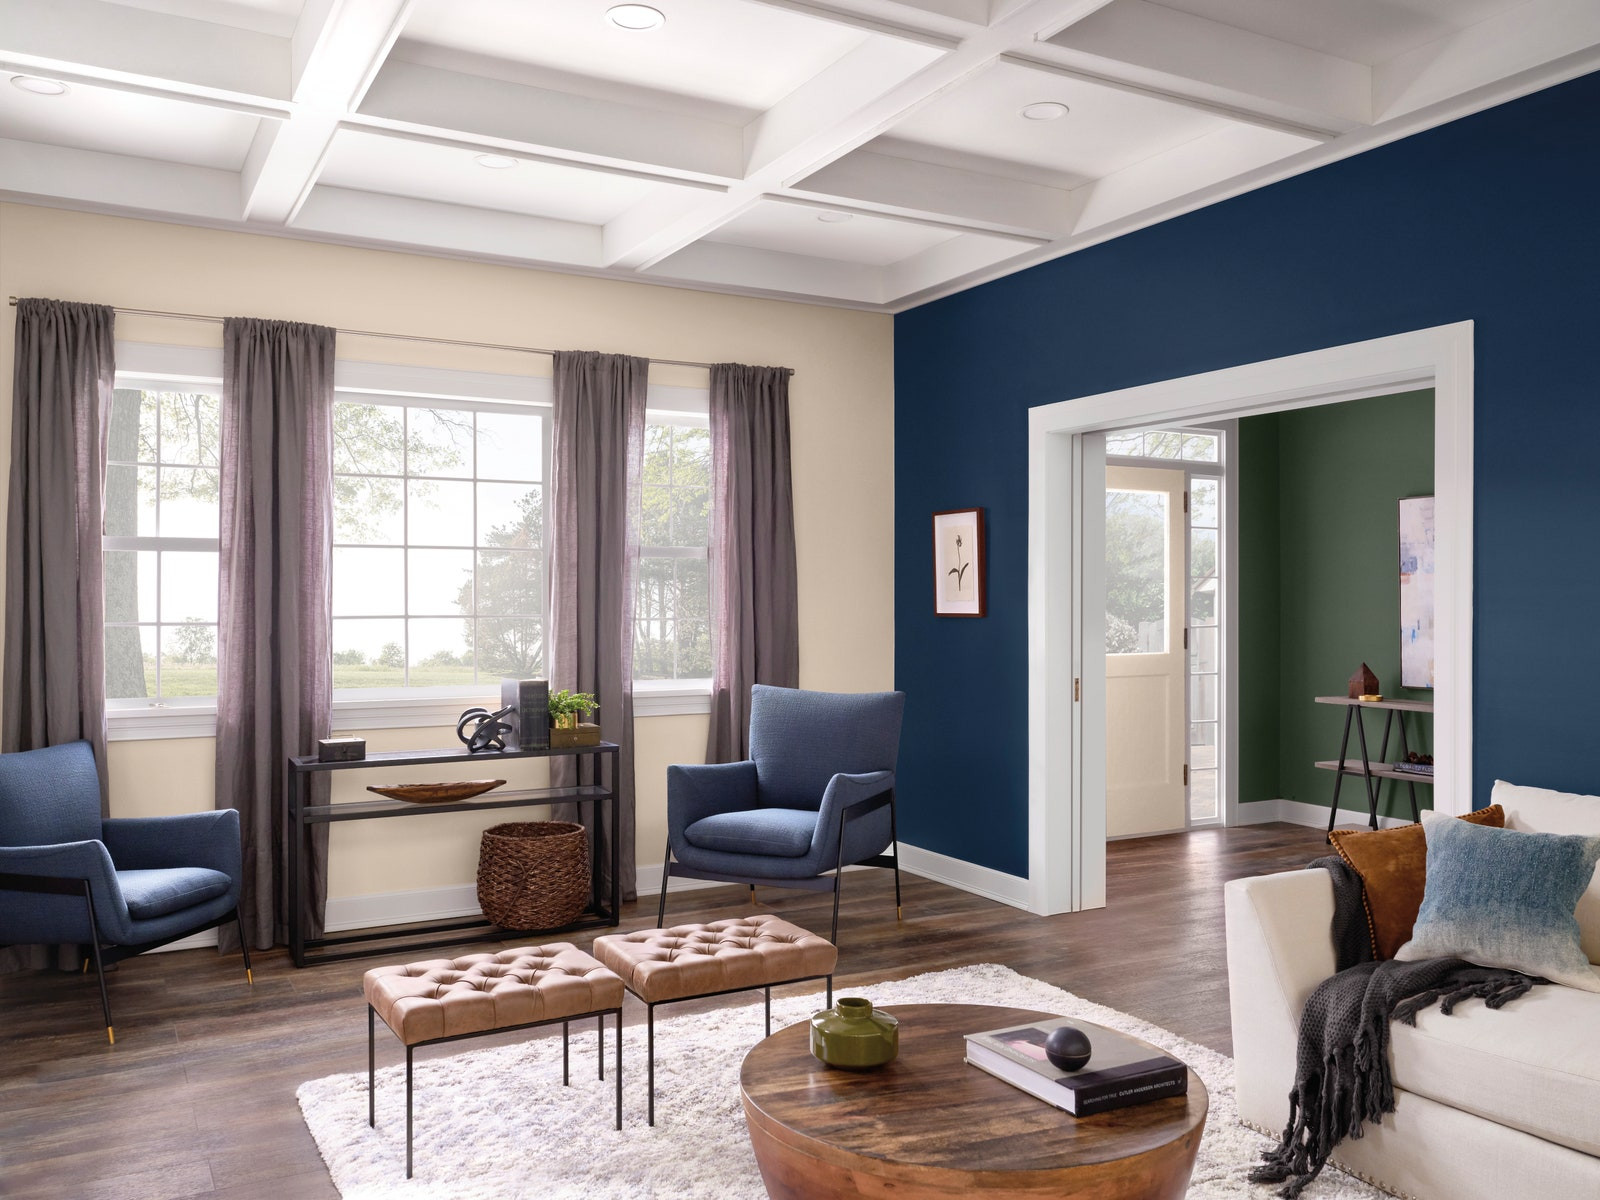 Living Room Color
 The Color Trends We’ll Be Seeing in 2020 According to